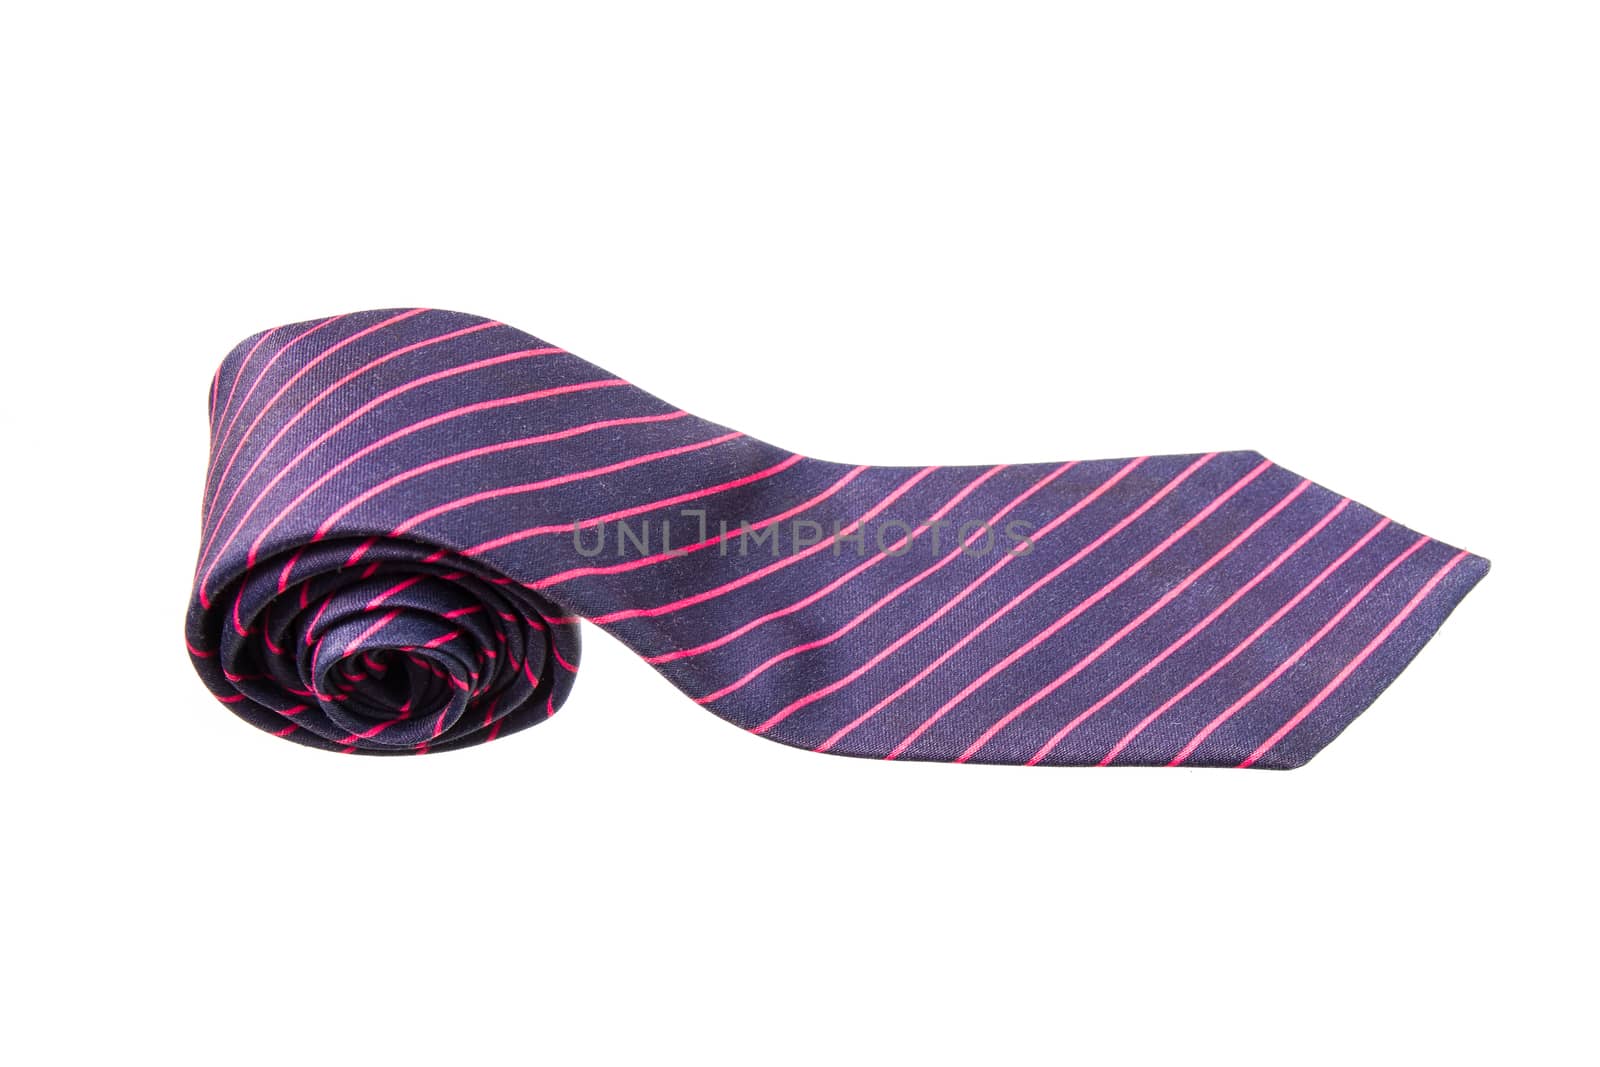 blue and pink strips business neck tie by kasinv